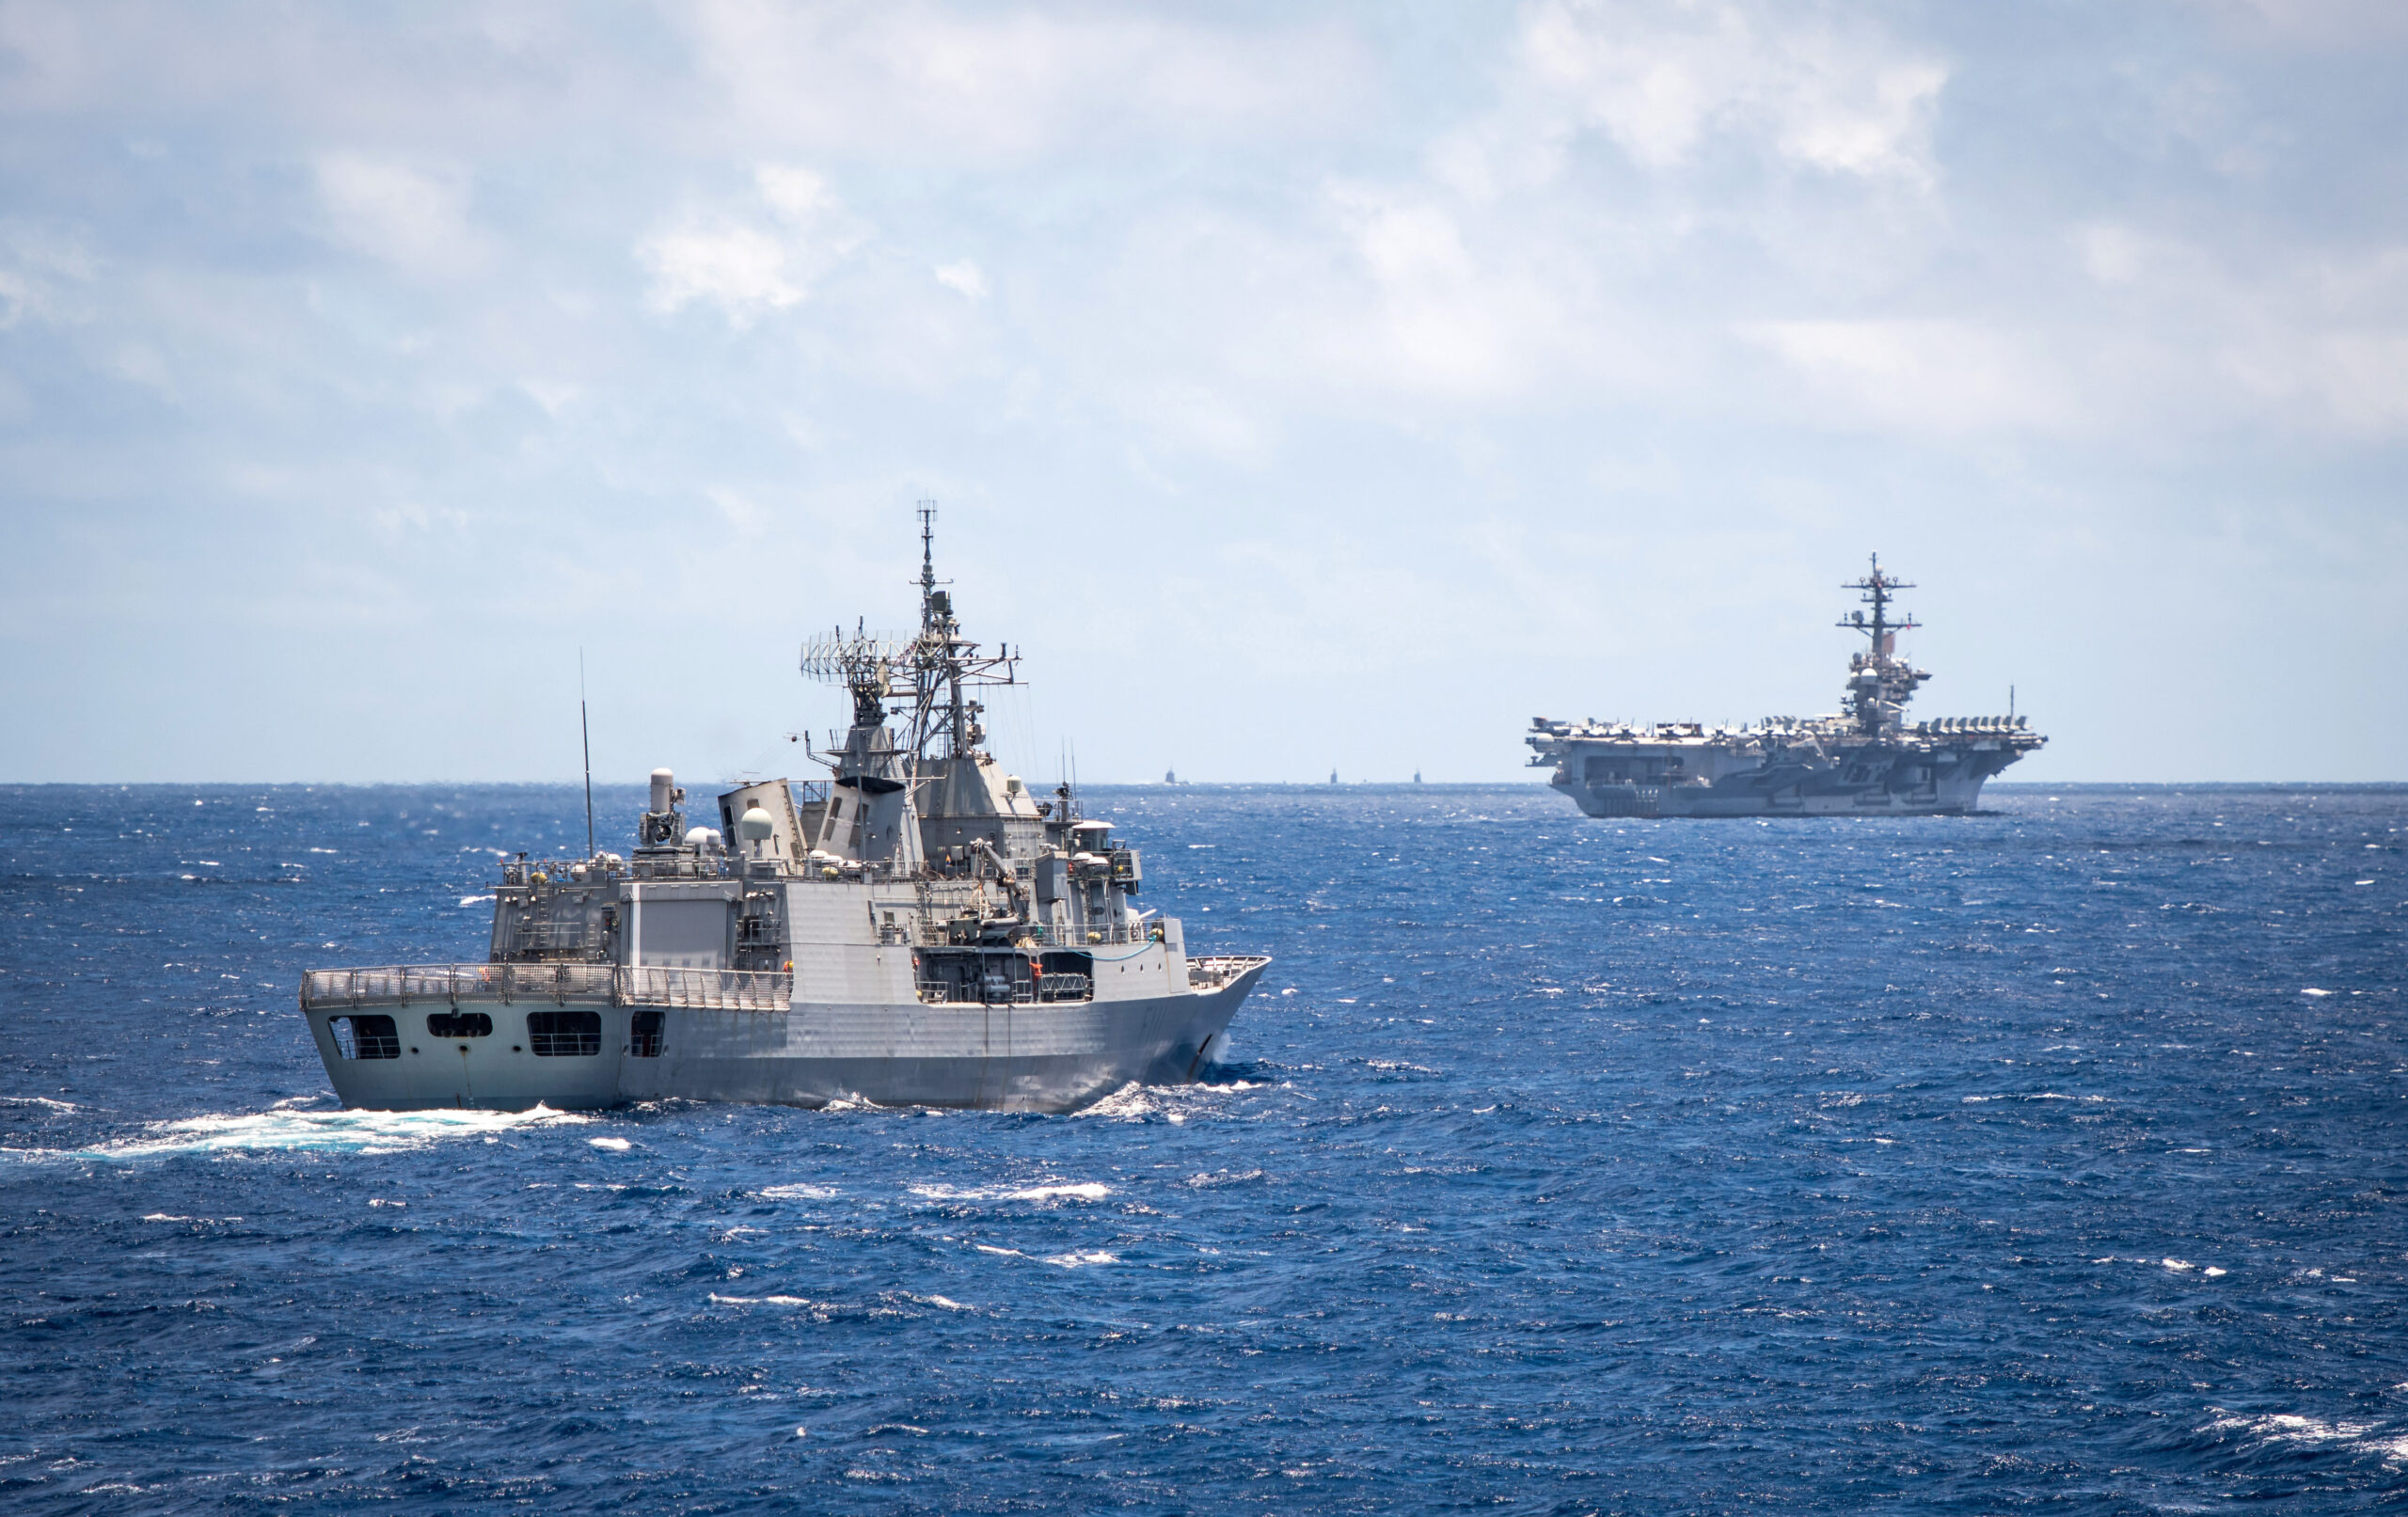 The Royal New Zealand Navy (RNZN) ANZAC frigate HMNZS Te Mana (left) works with the USN Nimitz-class aircraft carrier USS Carl Vinson in the Pacific Ocean in 2018, during the USN’s annual ‘RIMPAC’ exercise off Hawaii. The RNZN’s two ANZAC frigates have recently completed upgrade work, including the addition of the Lockheed Martin CMS 330 combat management system. (US Navy)